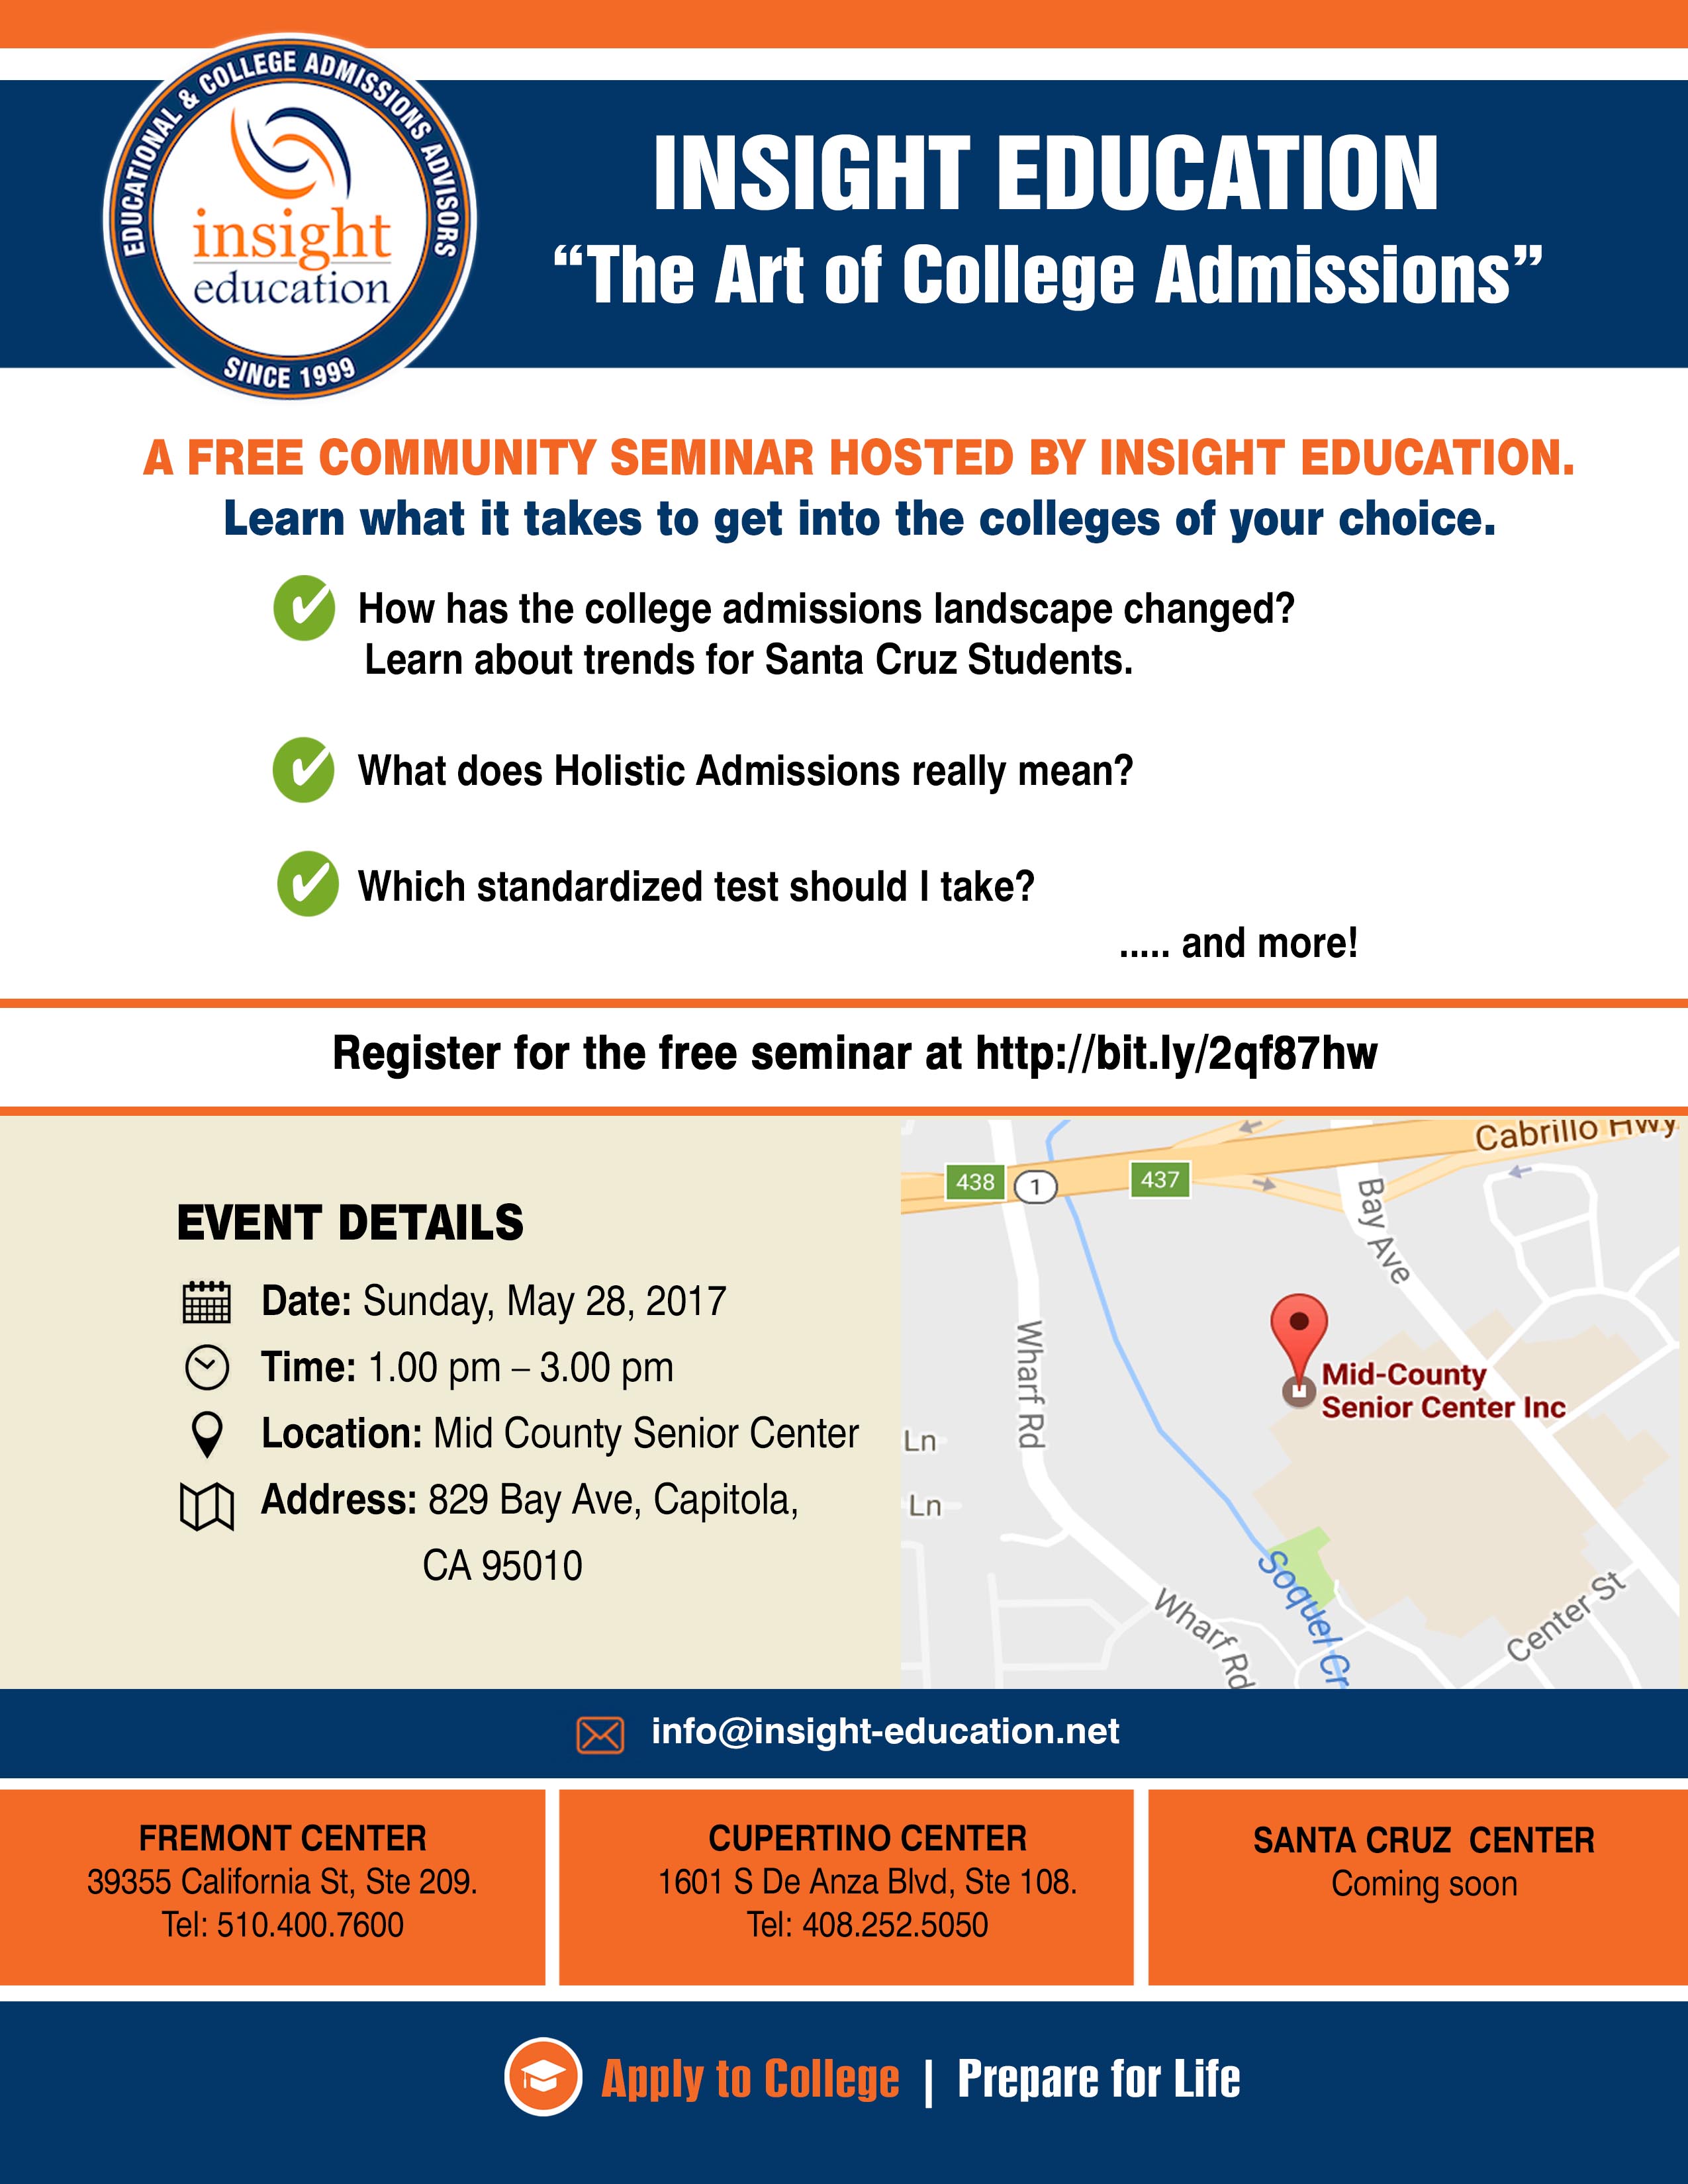 The Art of College Admissions